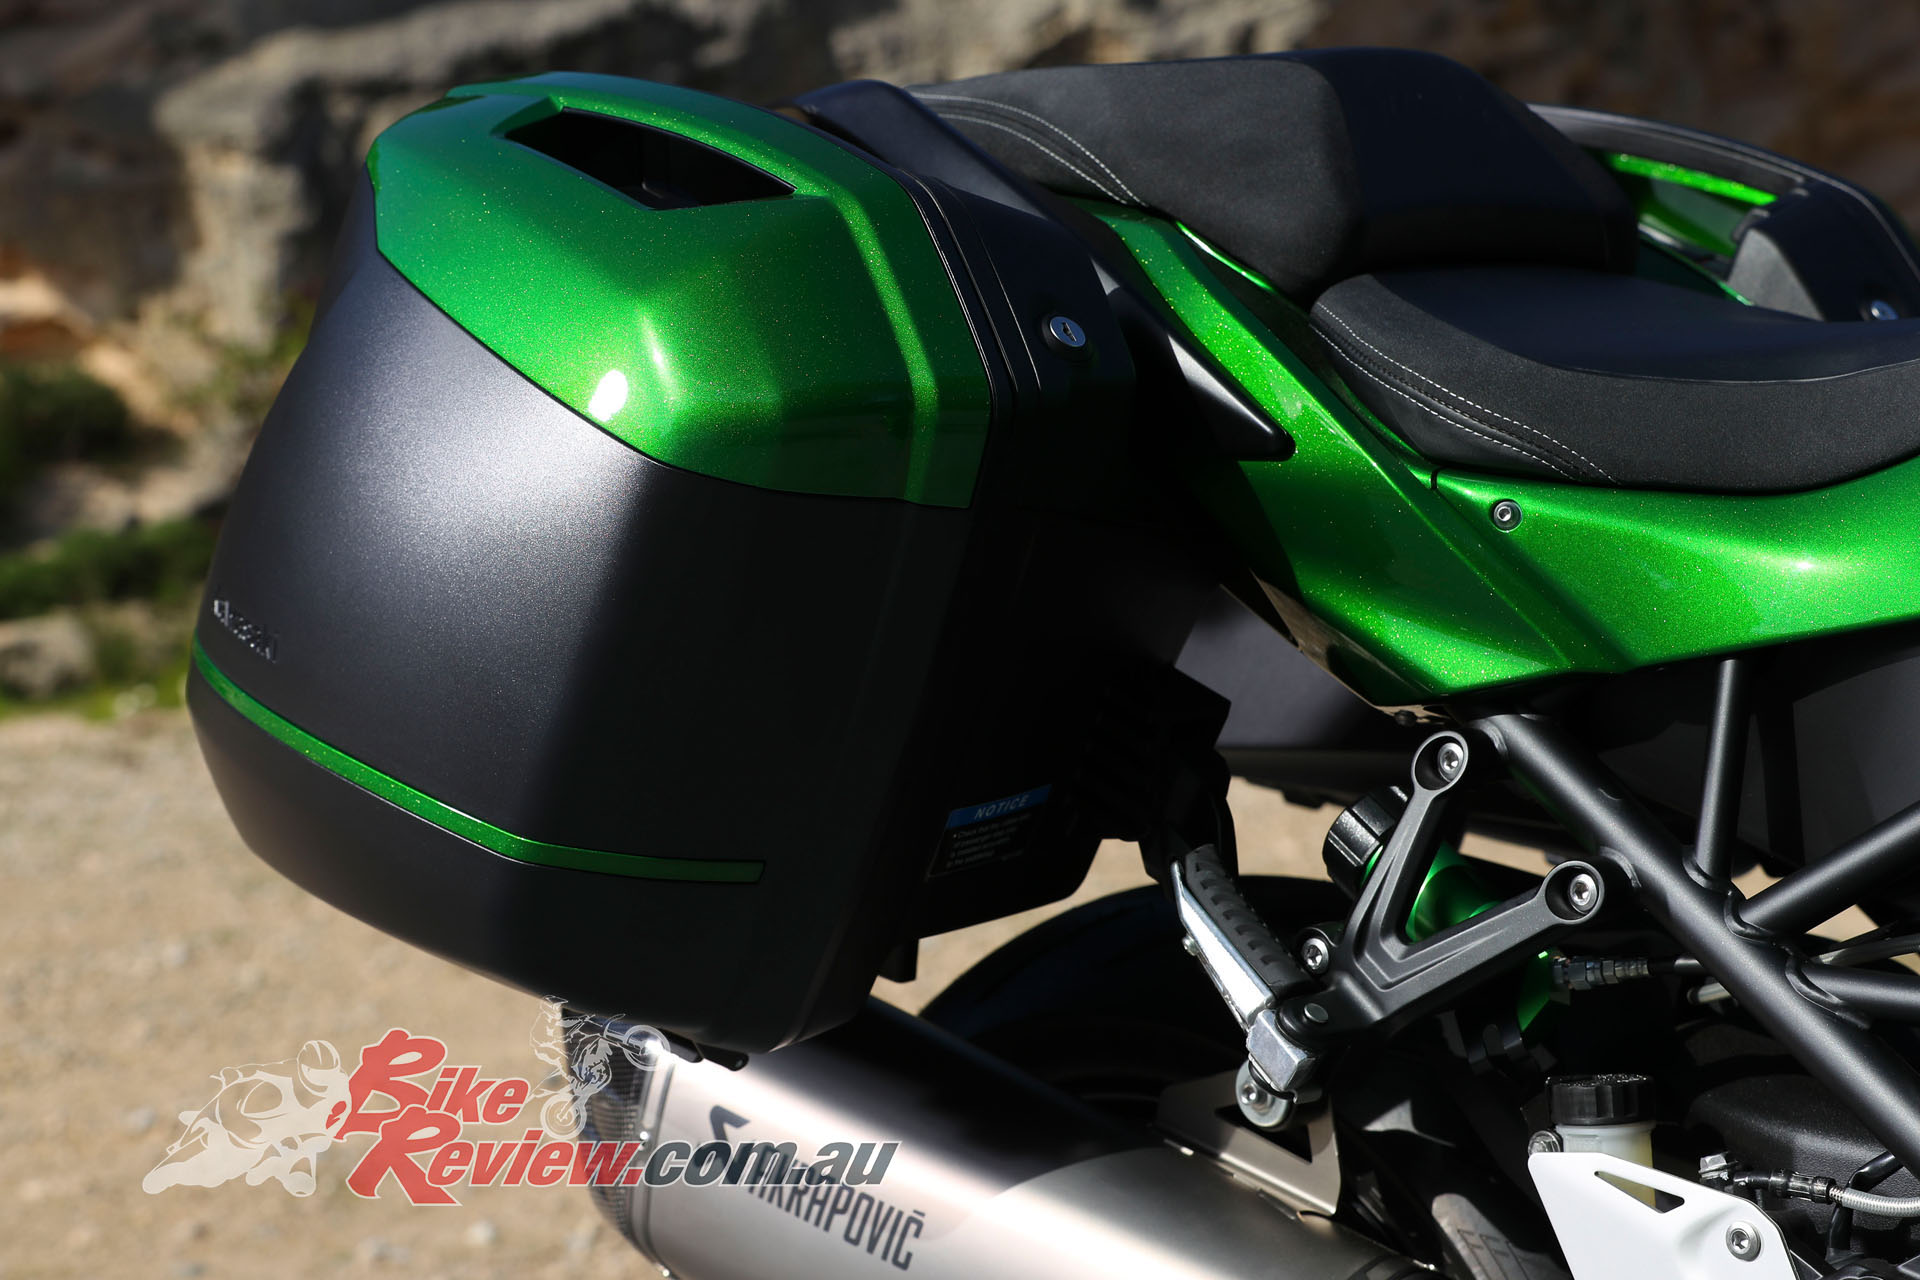 A seamless pannier mount system is included in the pillion grab rails, with 28L Givi colour matched panniers available separately 